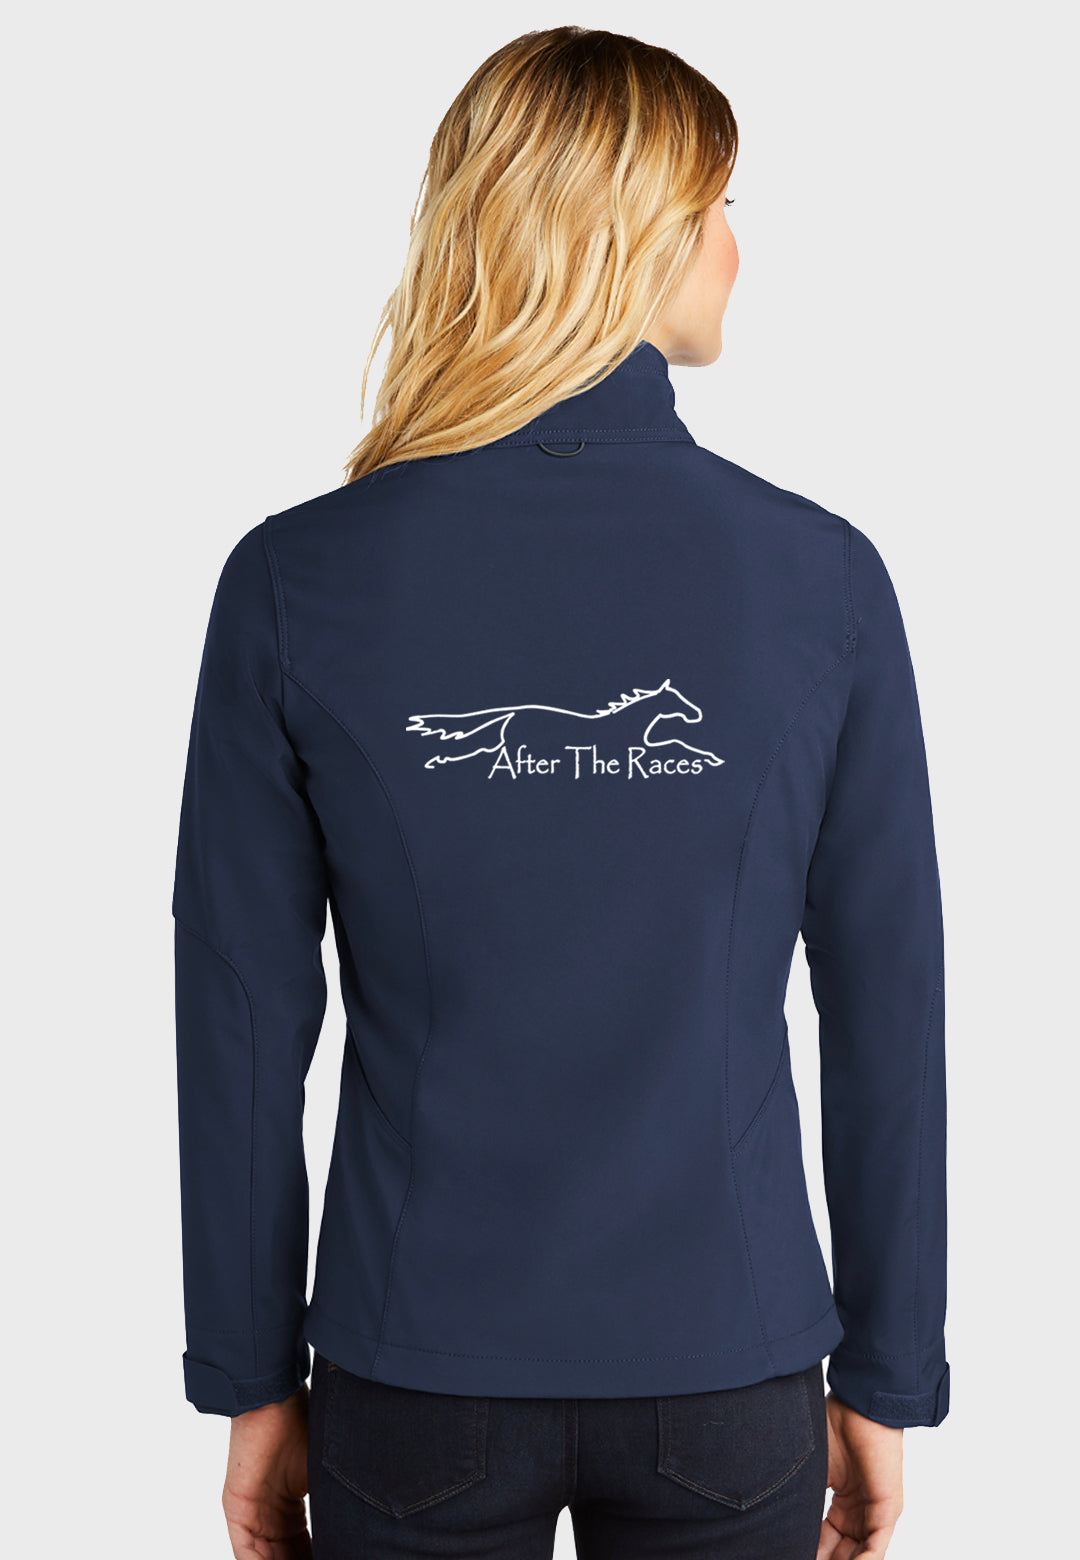 After the Races Ladies Eddie Bauer® Soft Shell Jacket - 2 Color Options